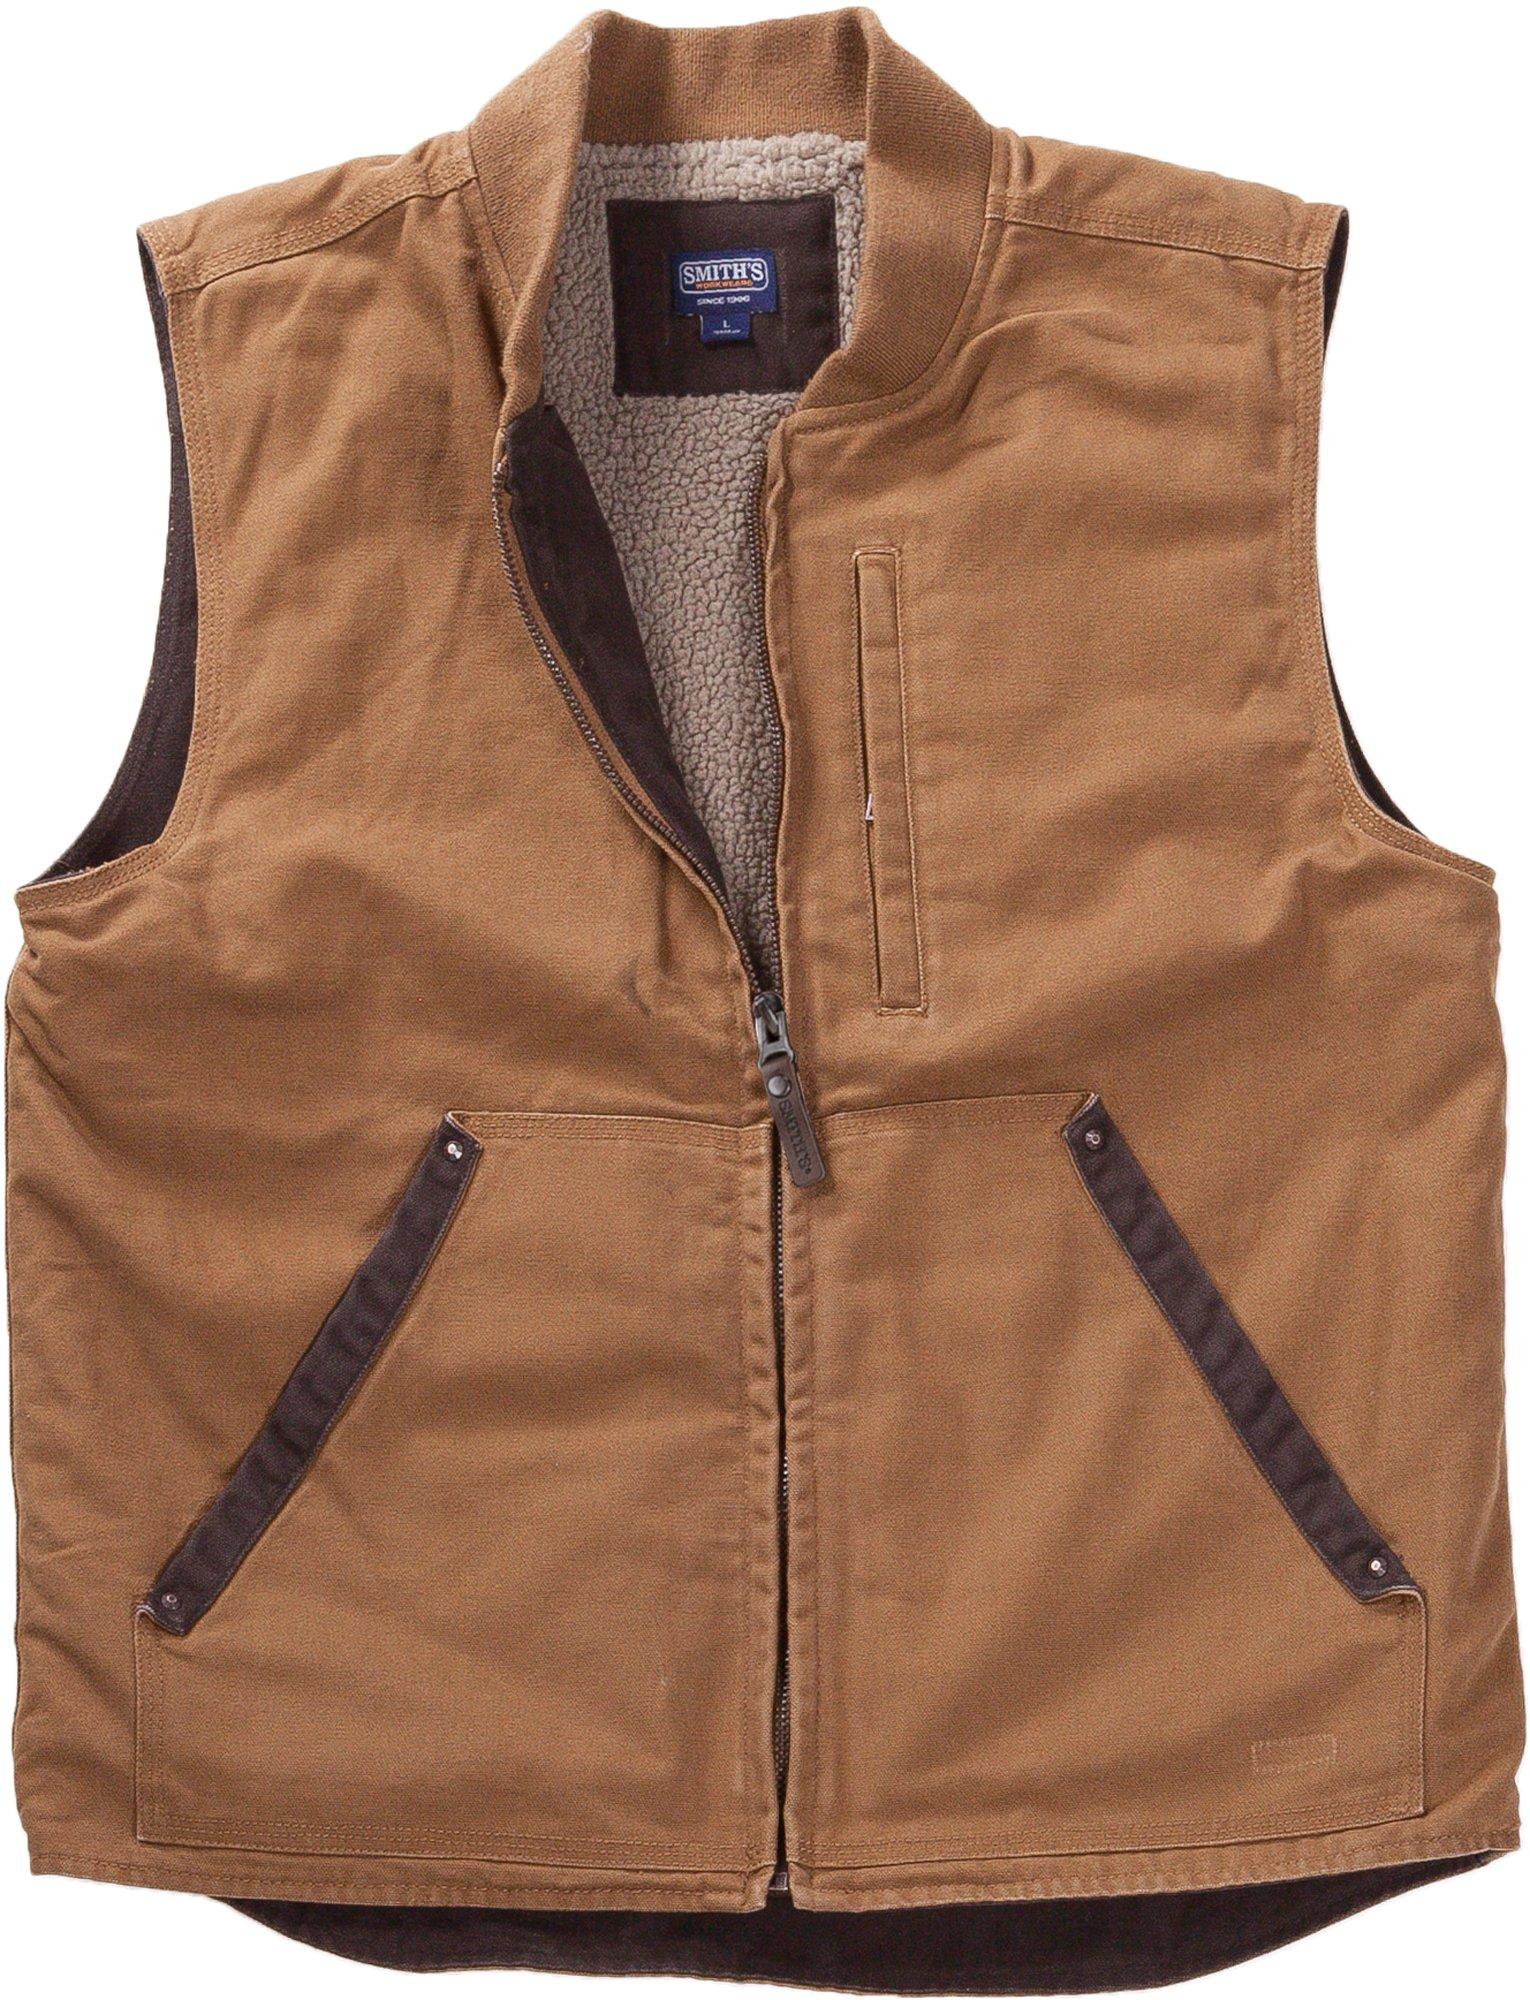 Smith's Workwear Mens Sherpa Lined Duck Canvas Vest